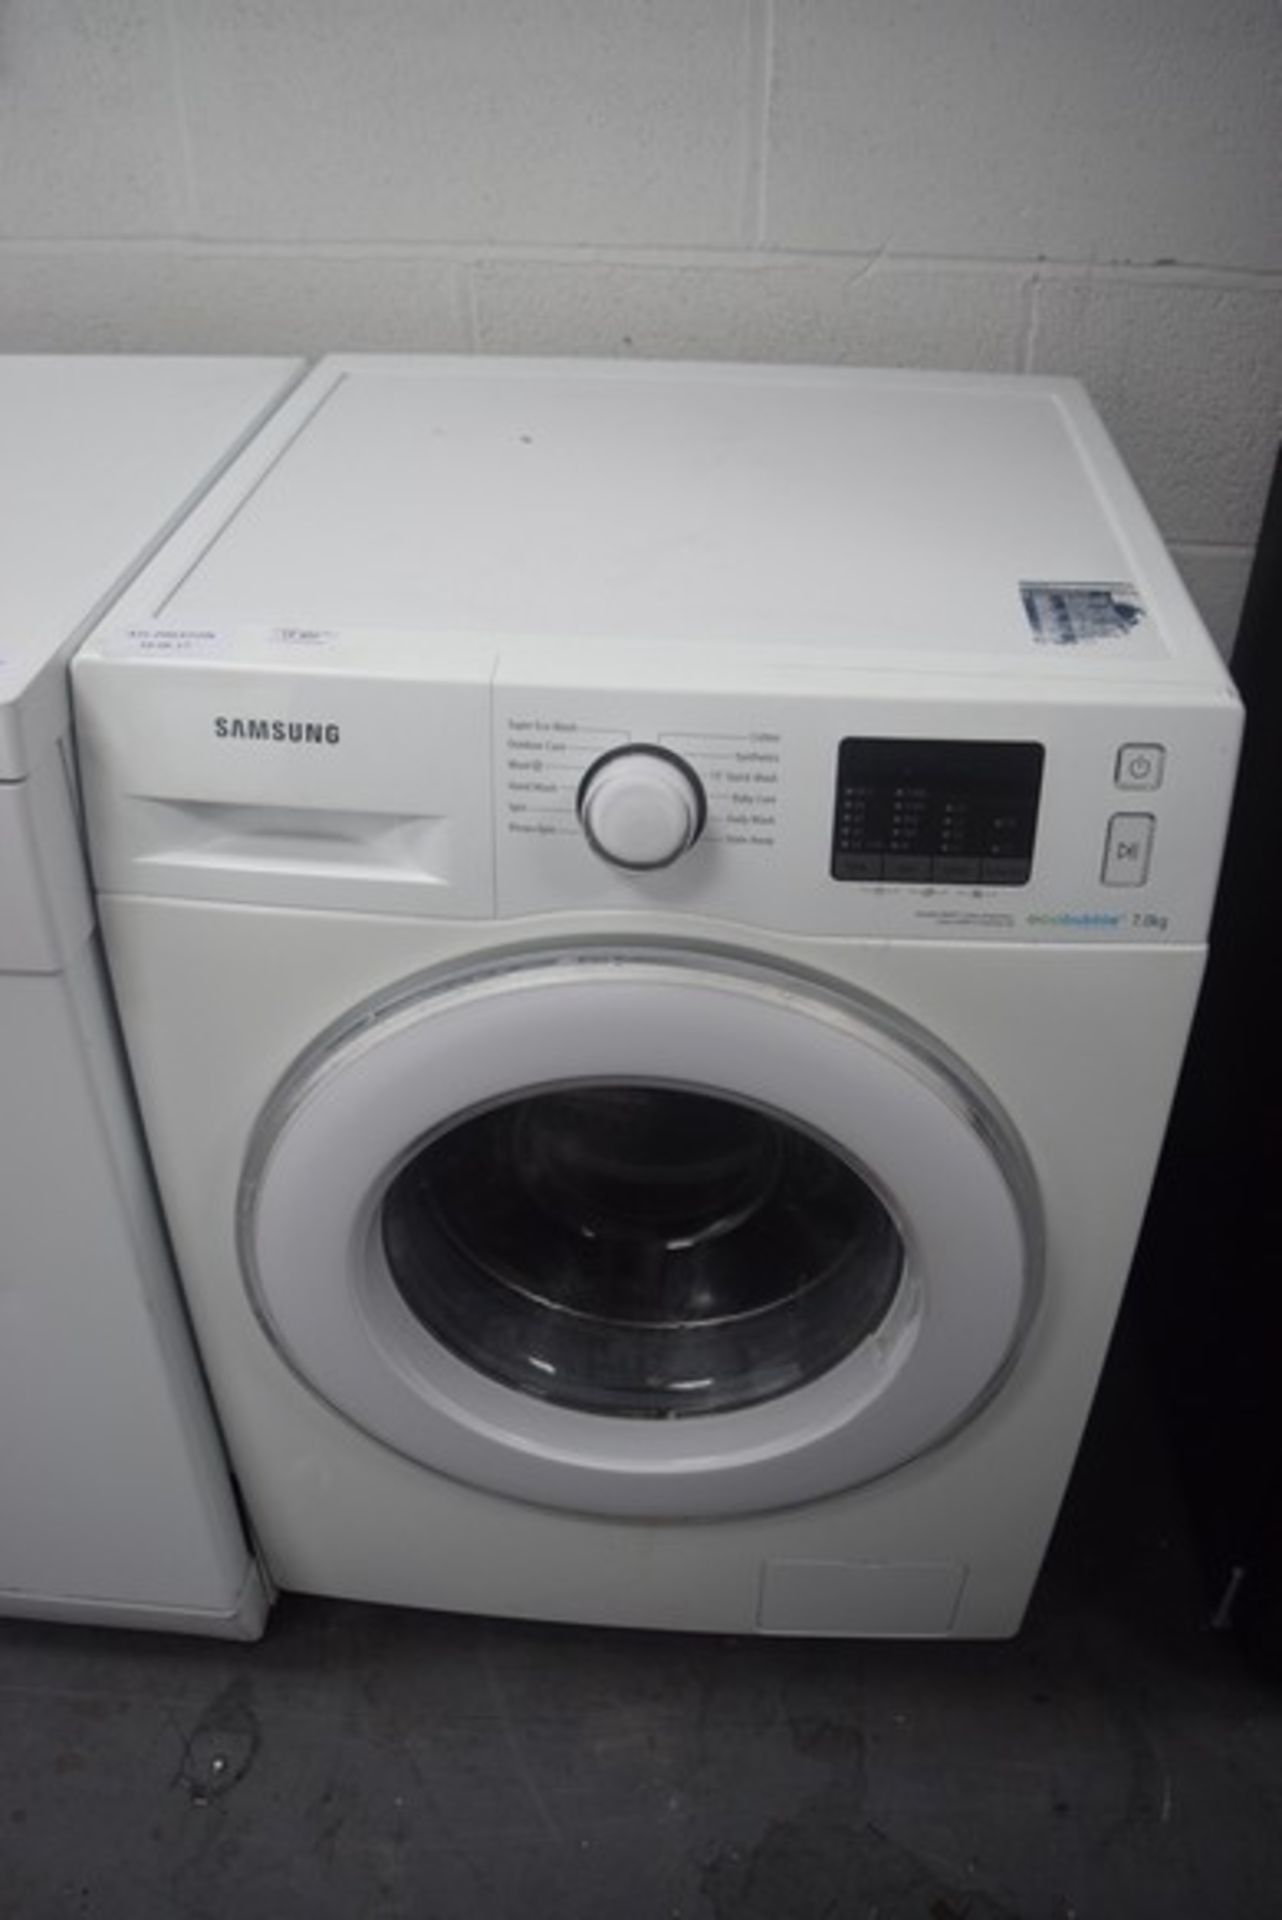 1 x SAMSUNG ECO BUBBLE 7KG WASHING MACHINE RRP £330 16/06/17 *PLEASE NOTE THAT THE BID PRICE IS